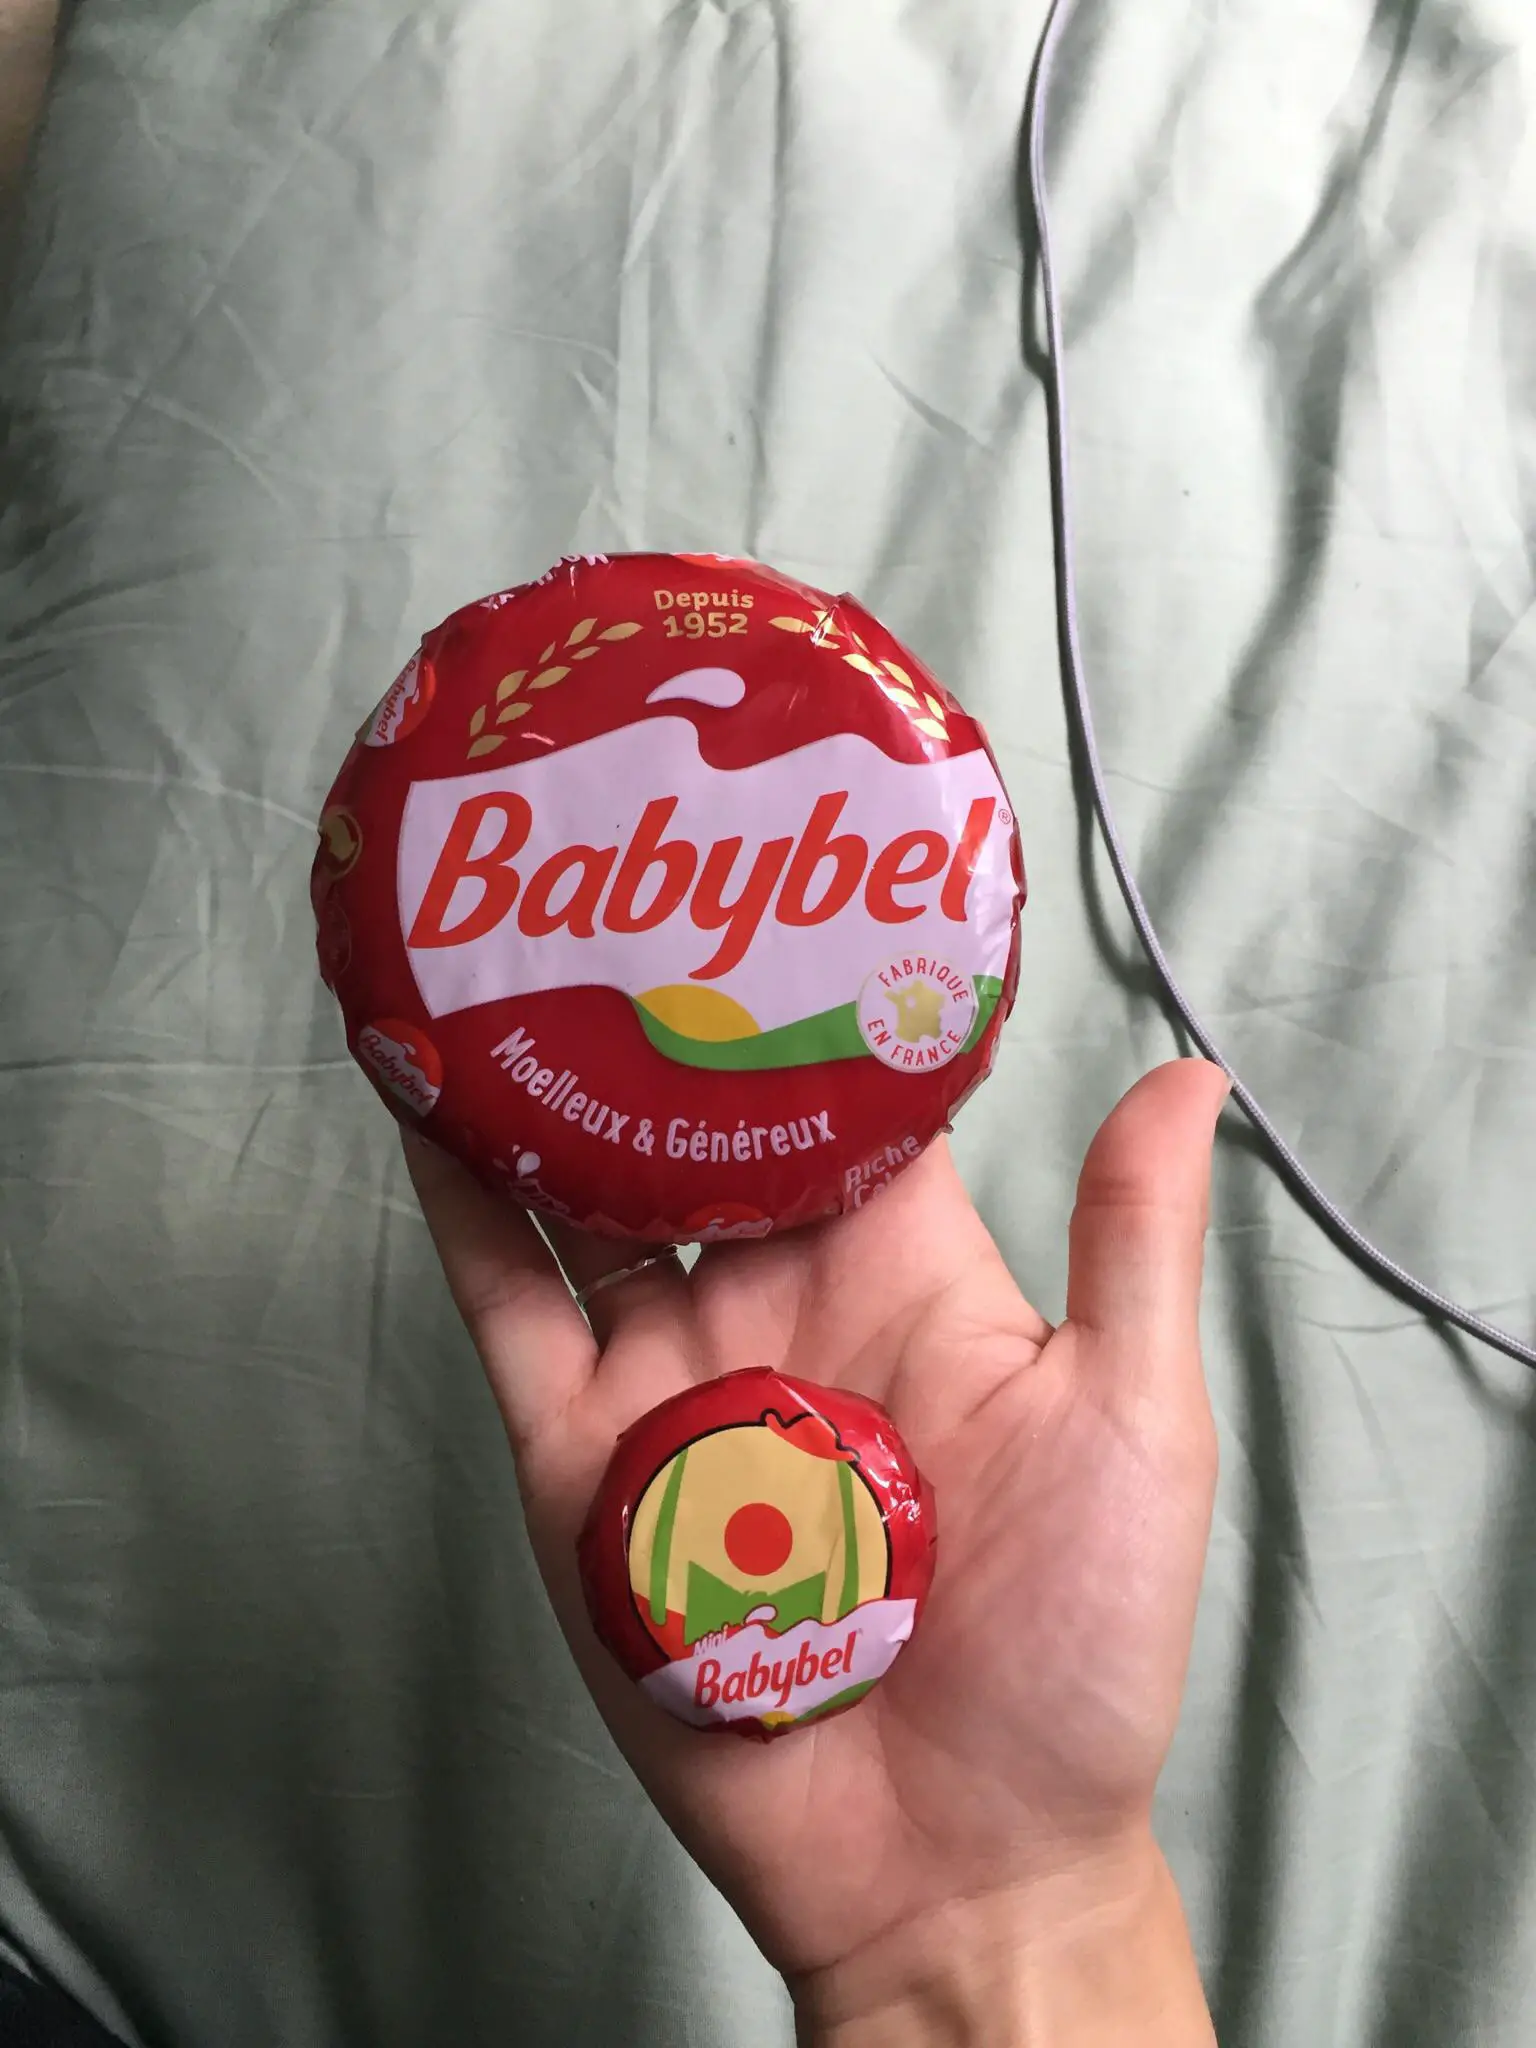 In France you can buy giant Babybel cheese (normal one on ...